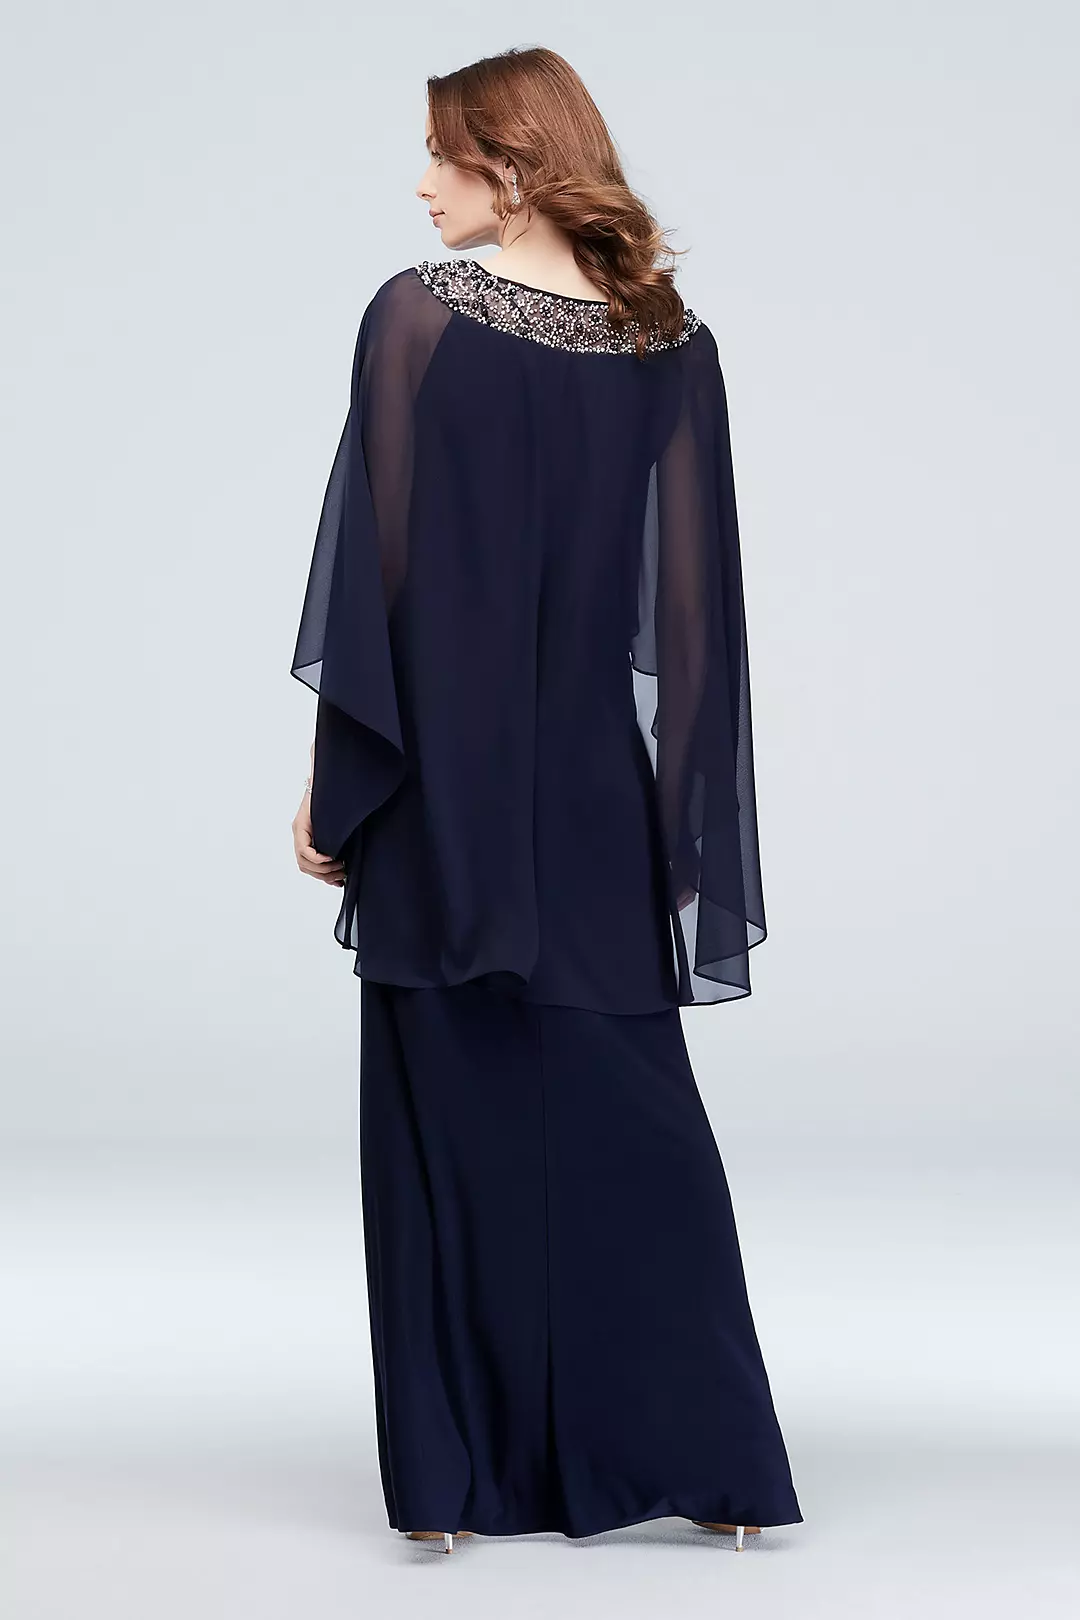 Embellished Neck Drape Sleeve Gown with Ruching Image 2